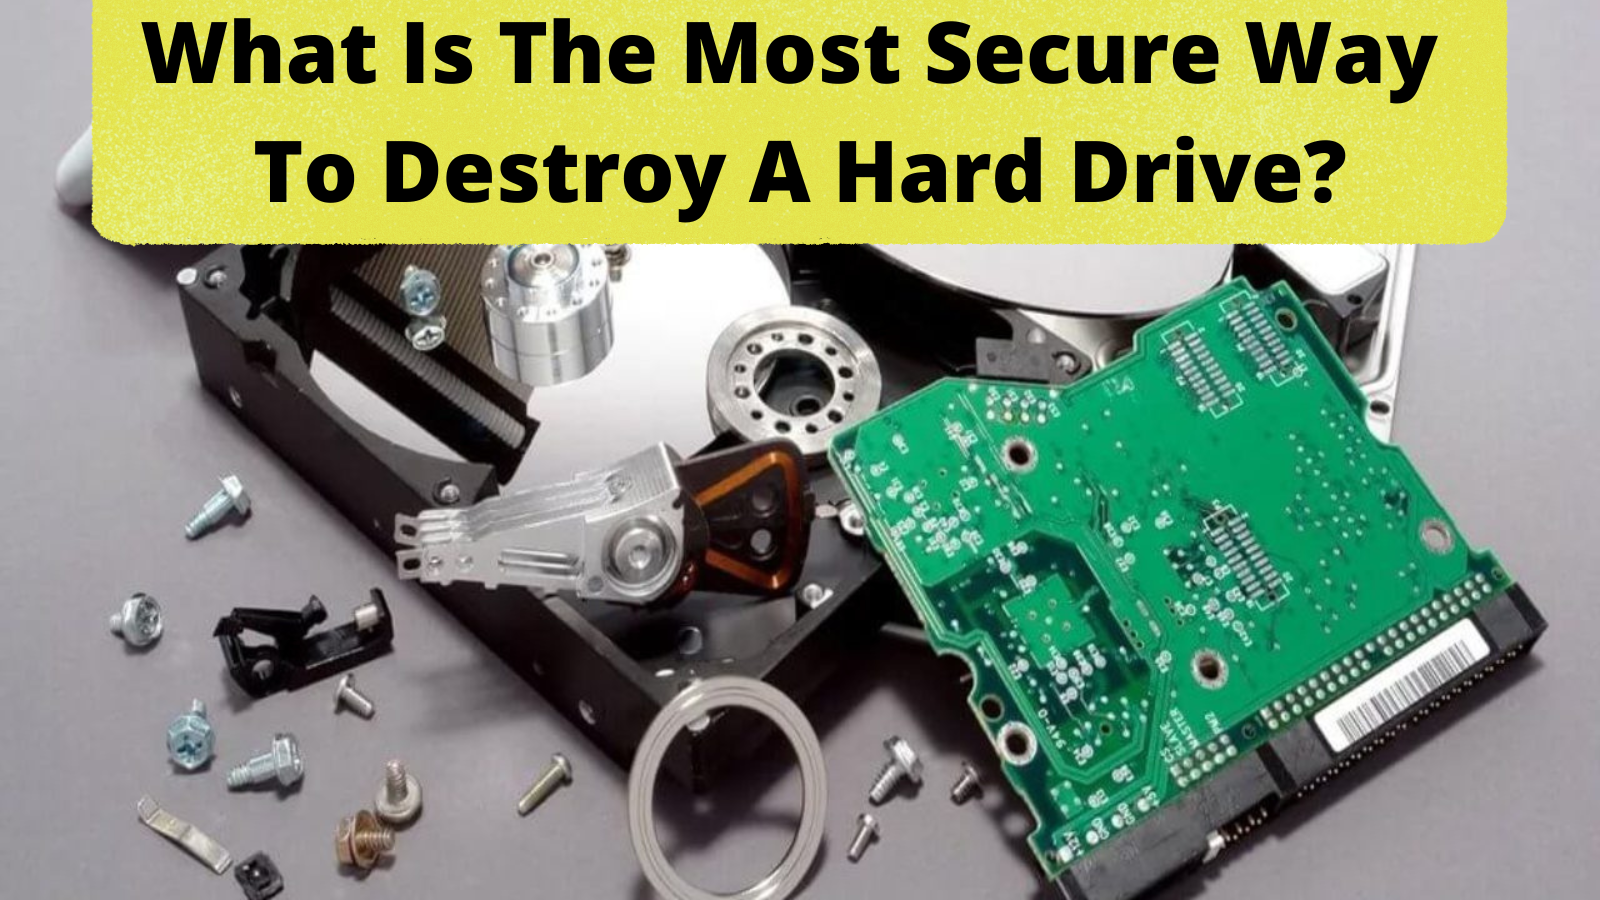 What is the most secure way to destroy a hard drive